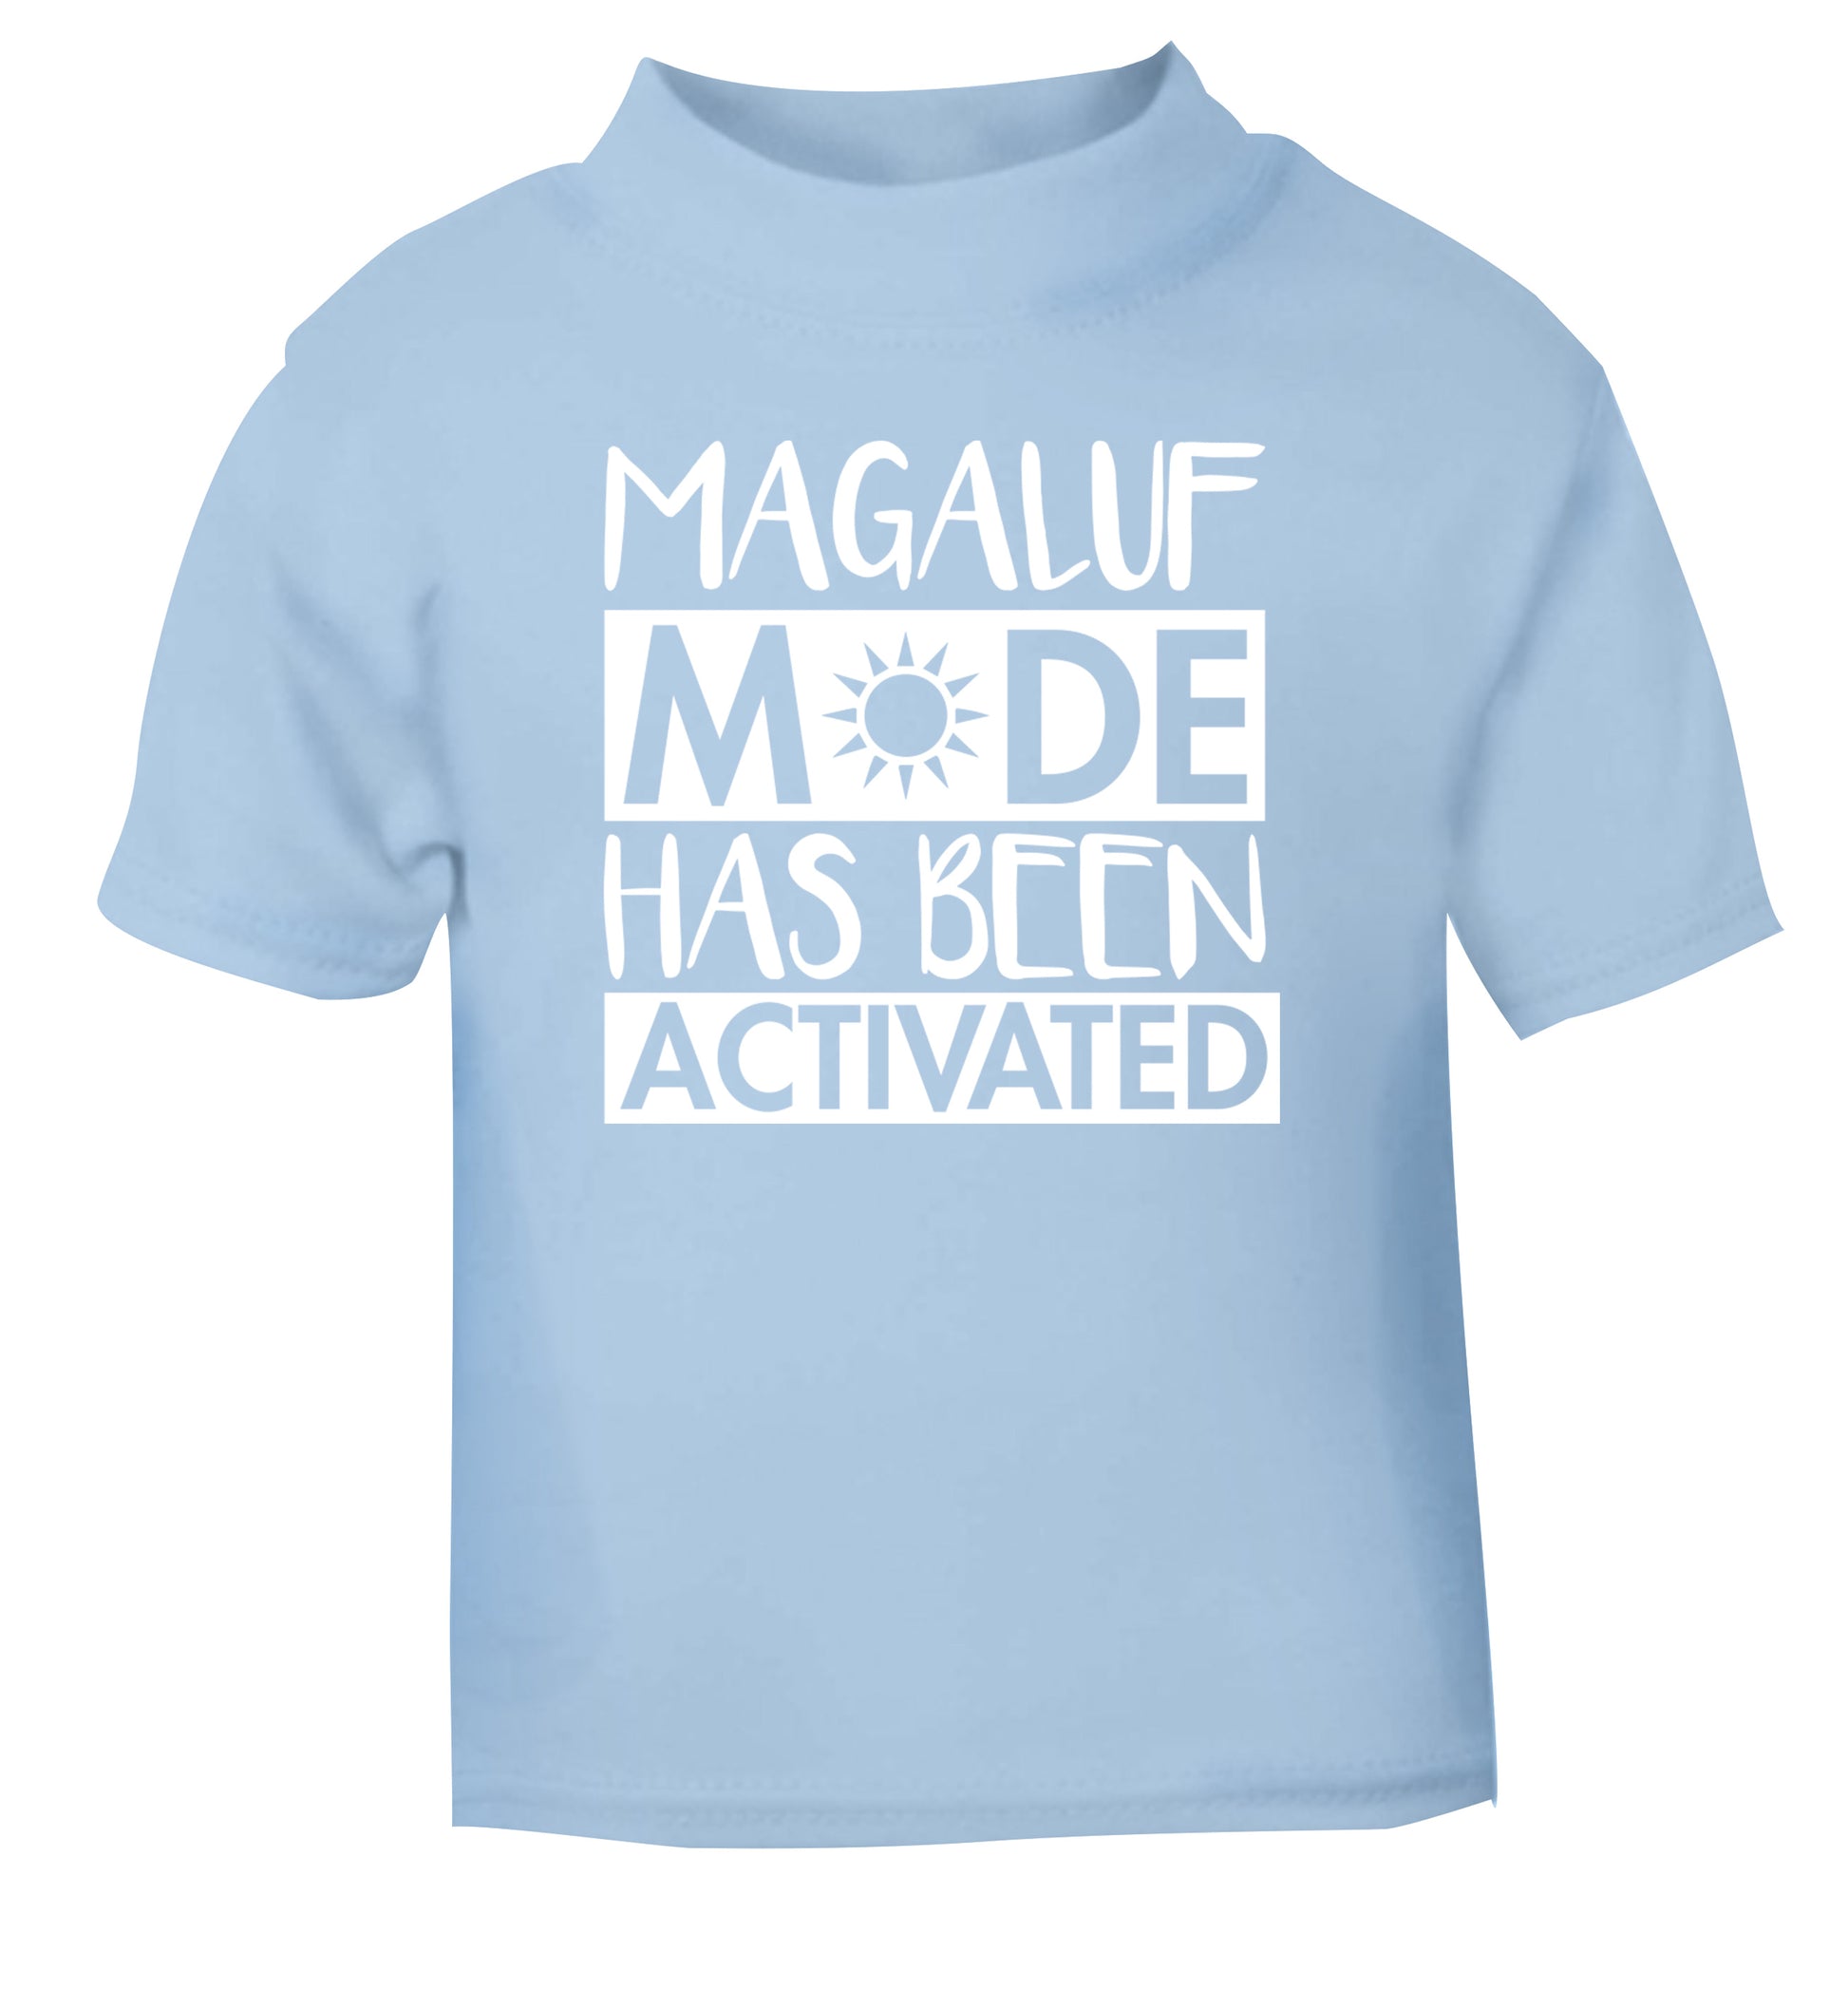 Magaluf mode has been activated light blue Baby Toddler Tshirt 2 Years